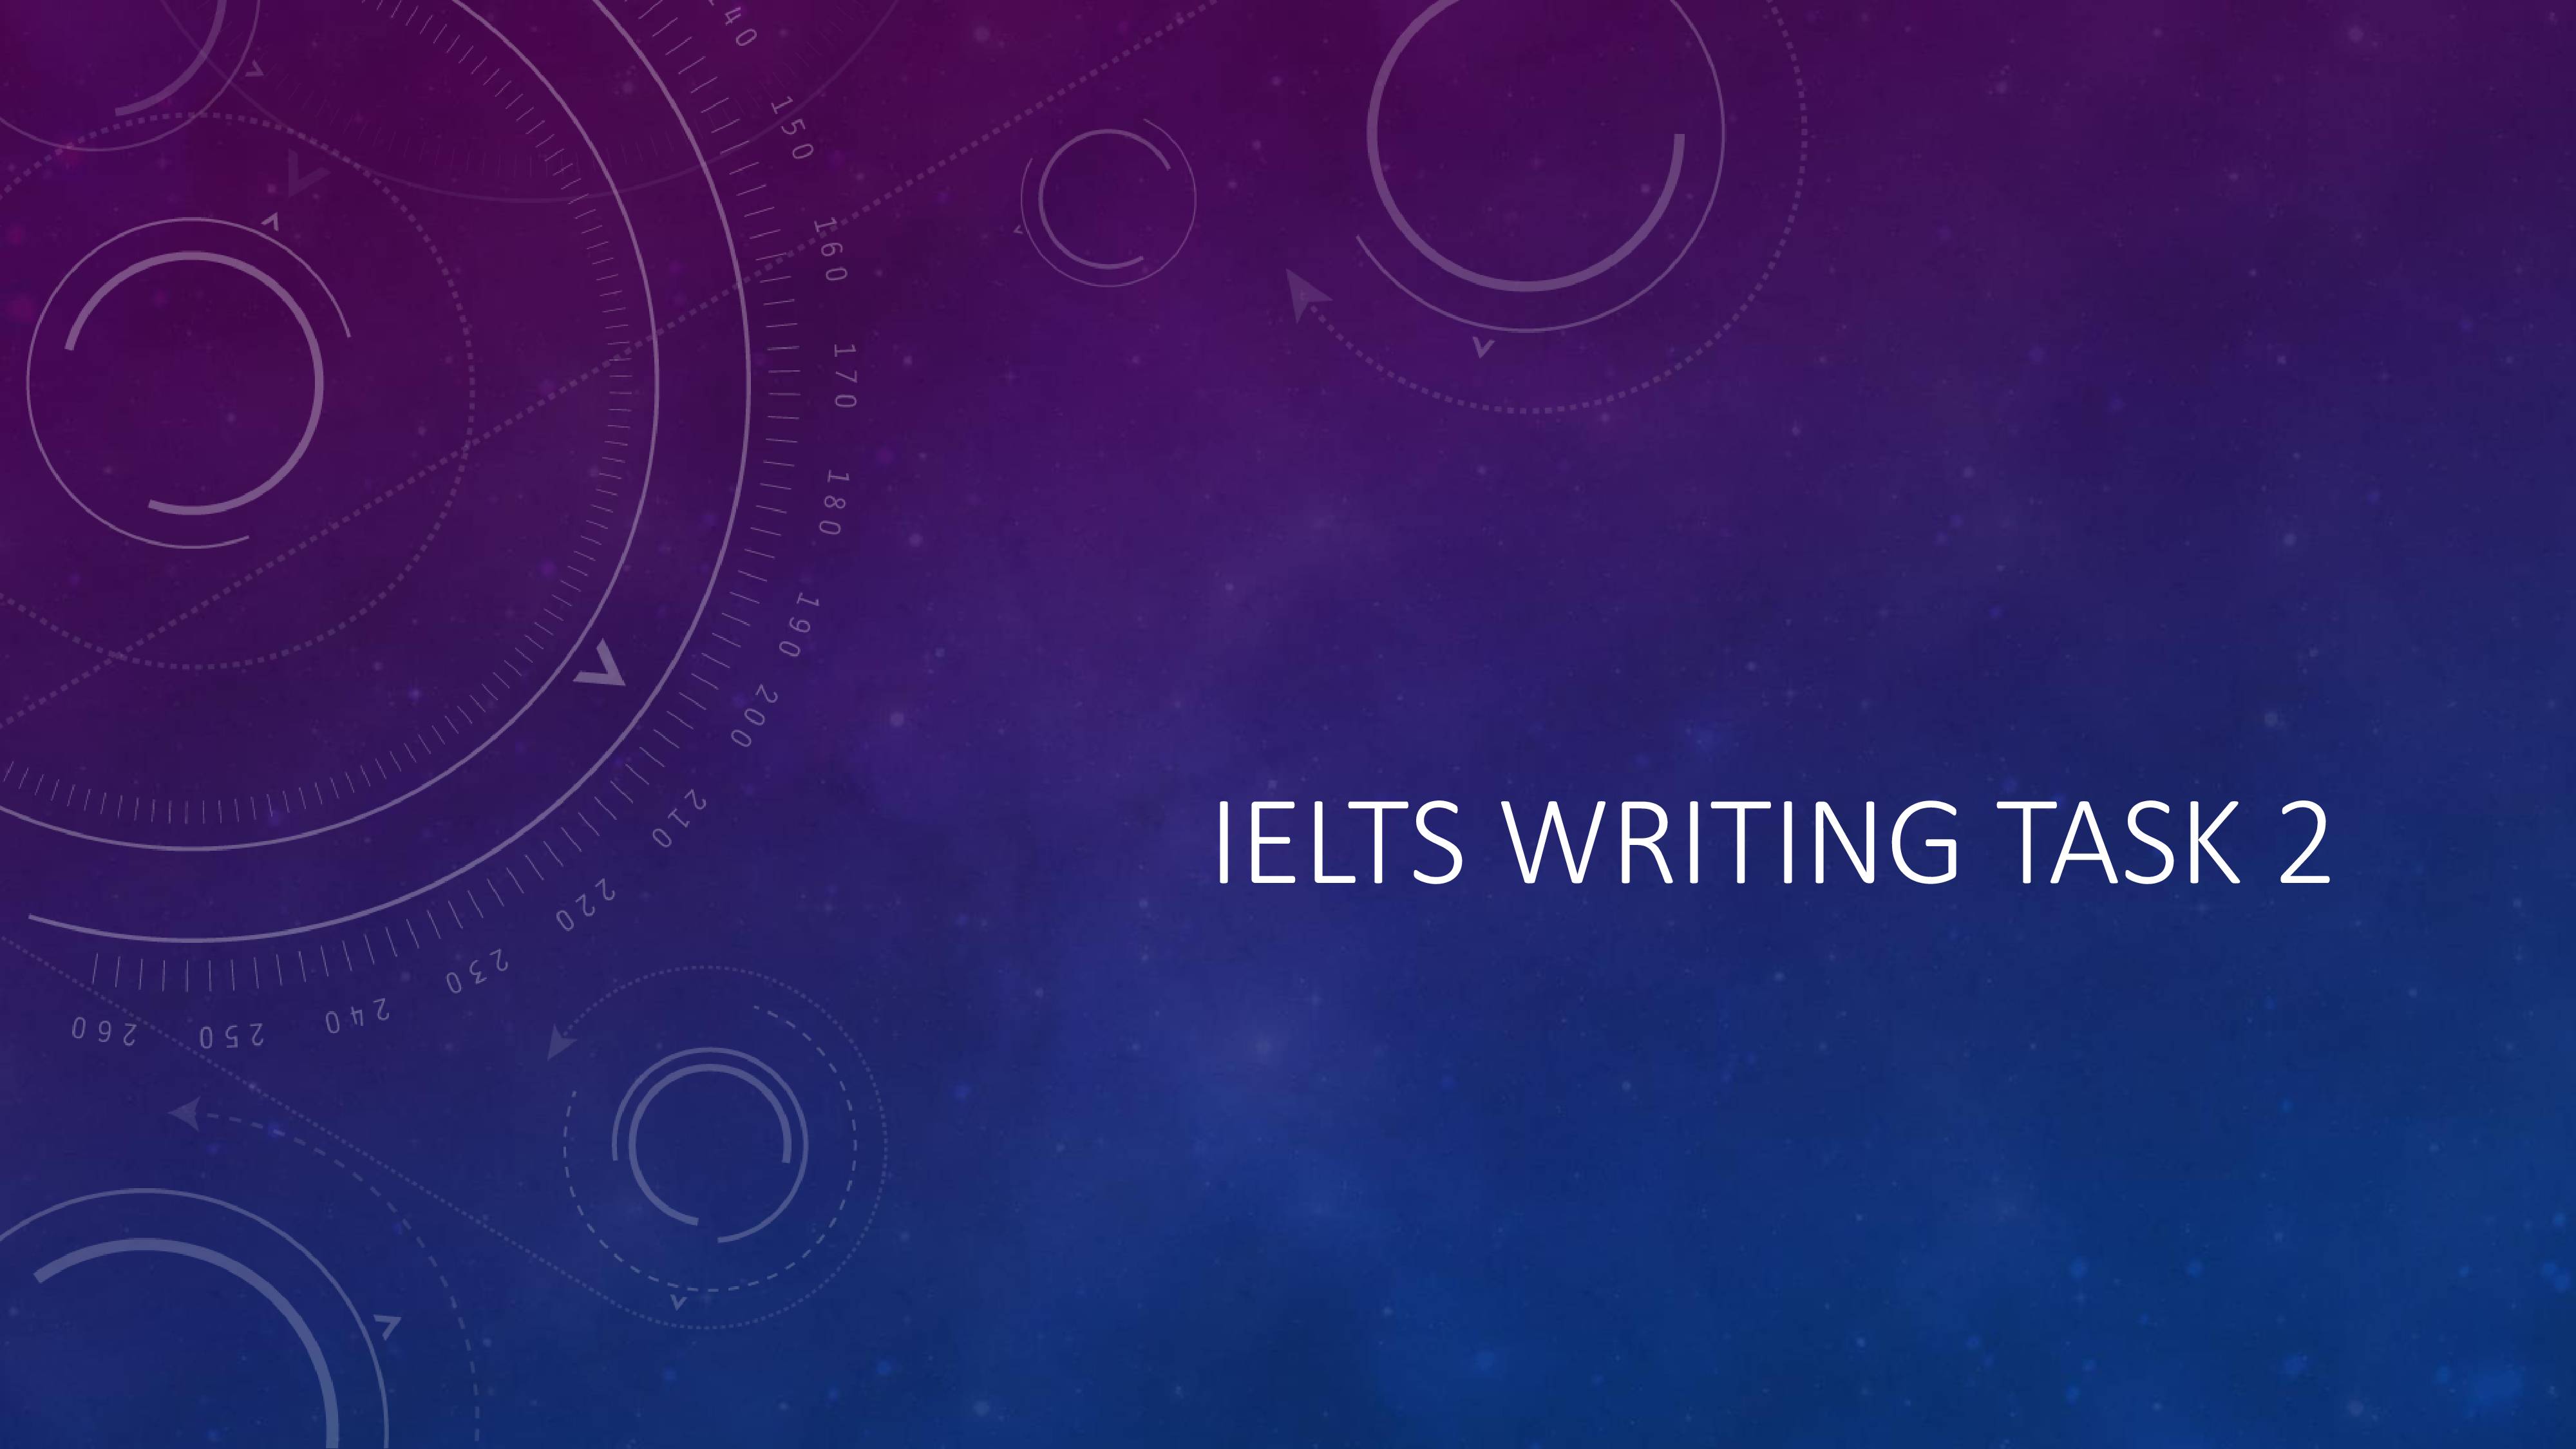 Quick Notes on IELTS Writing Task 2